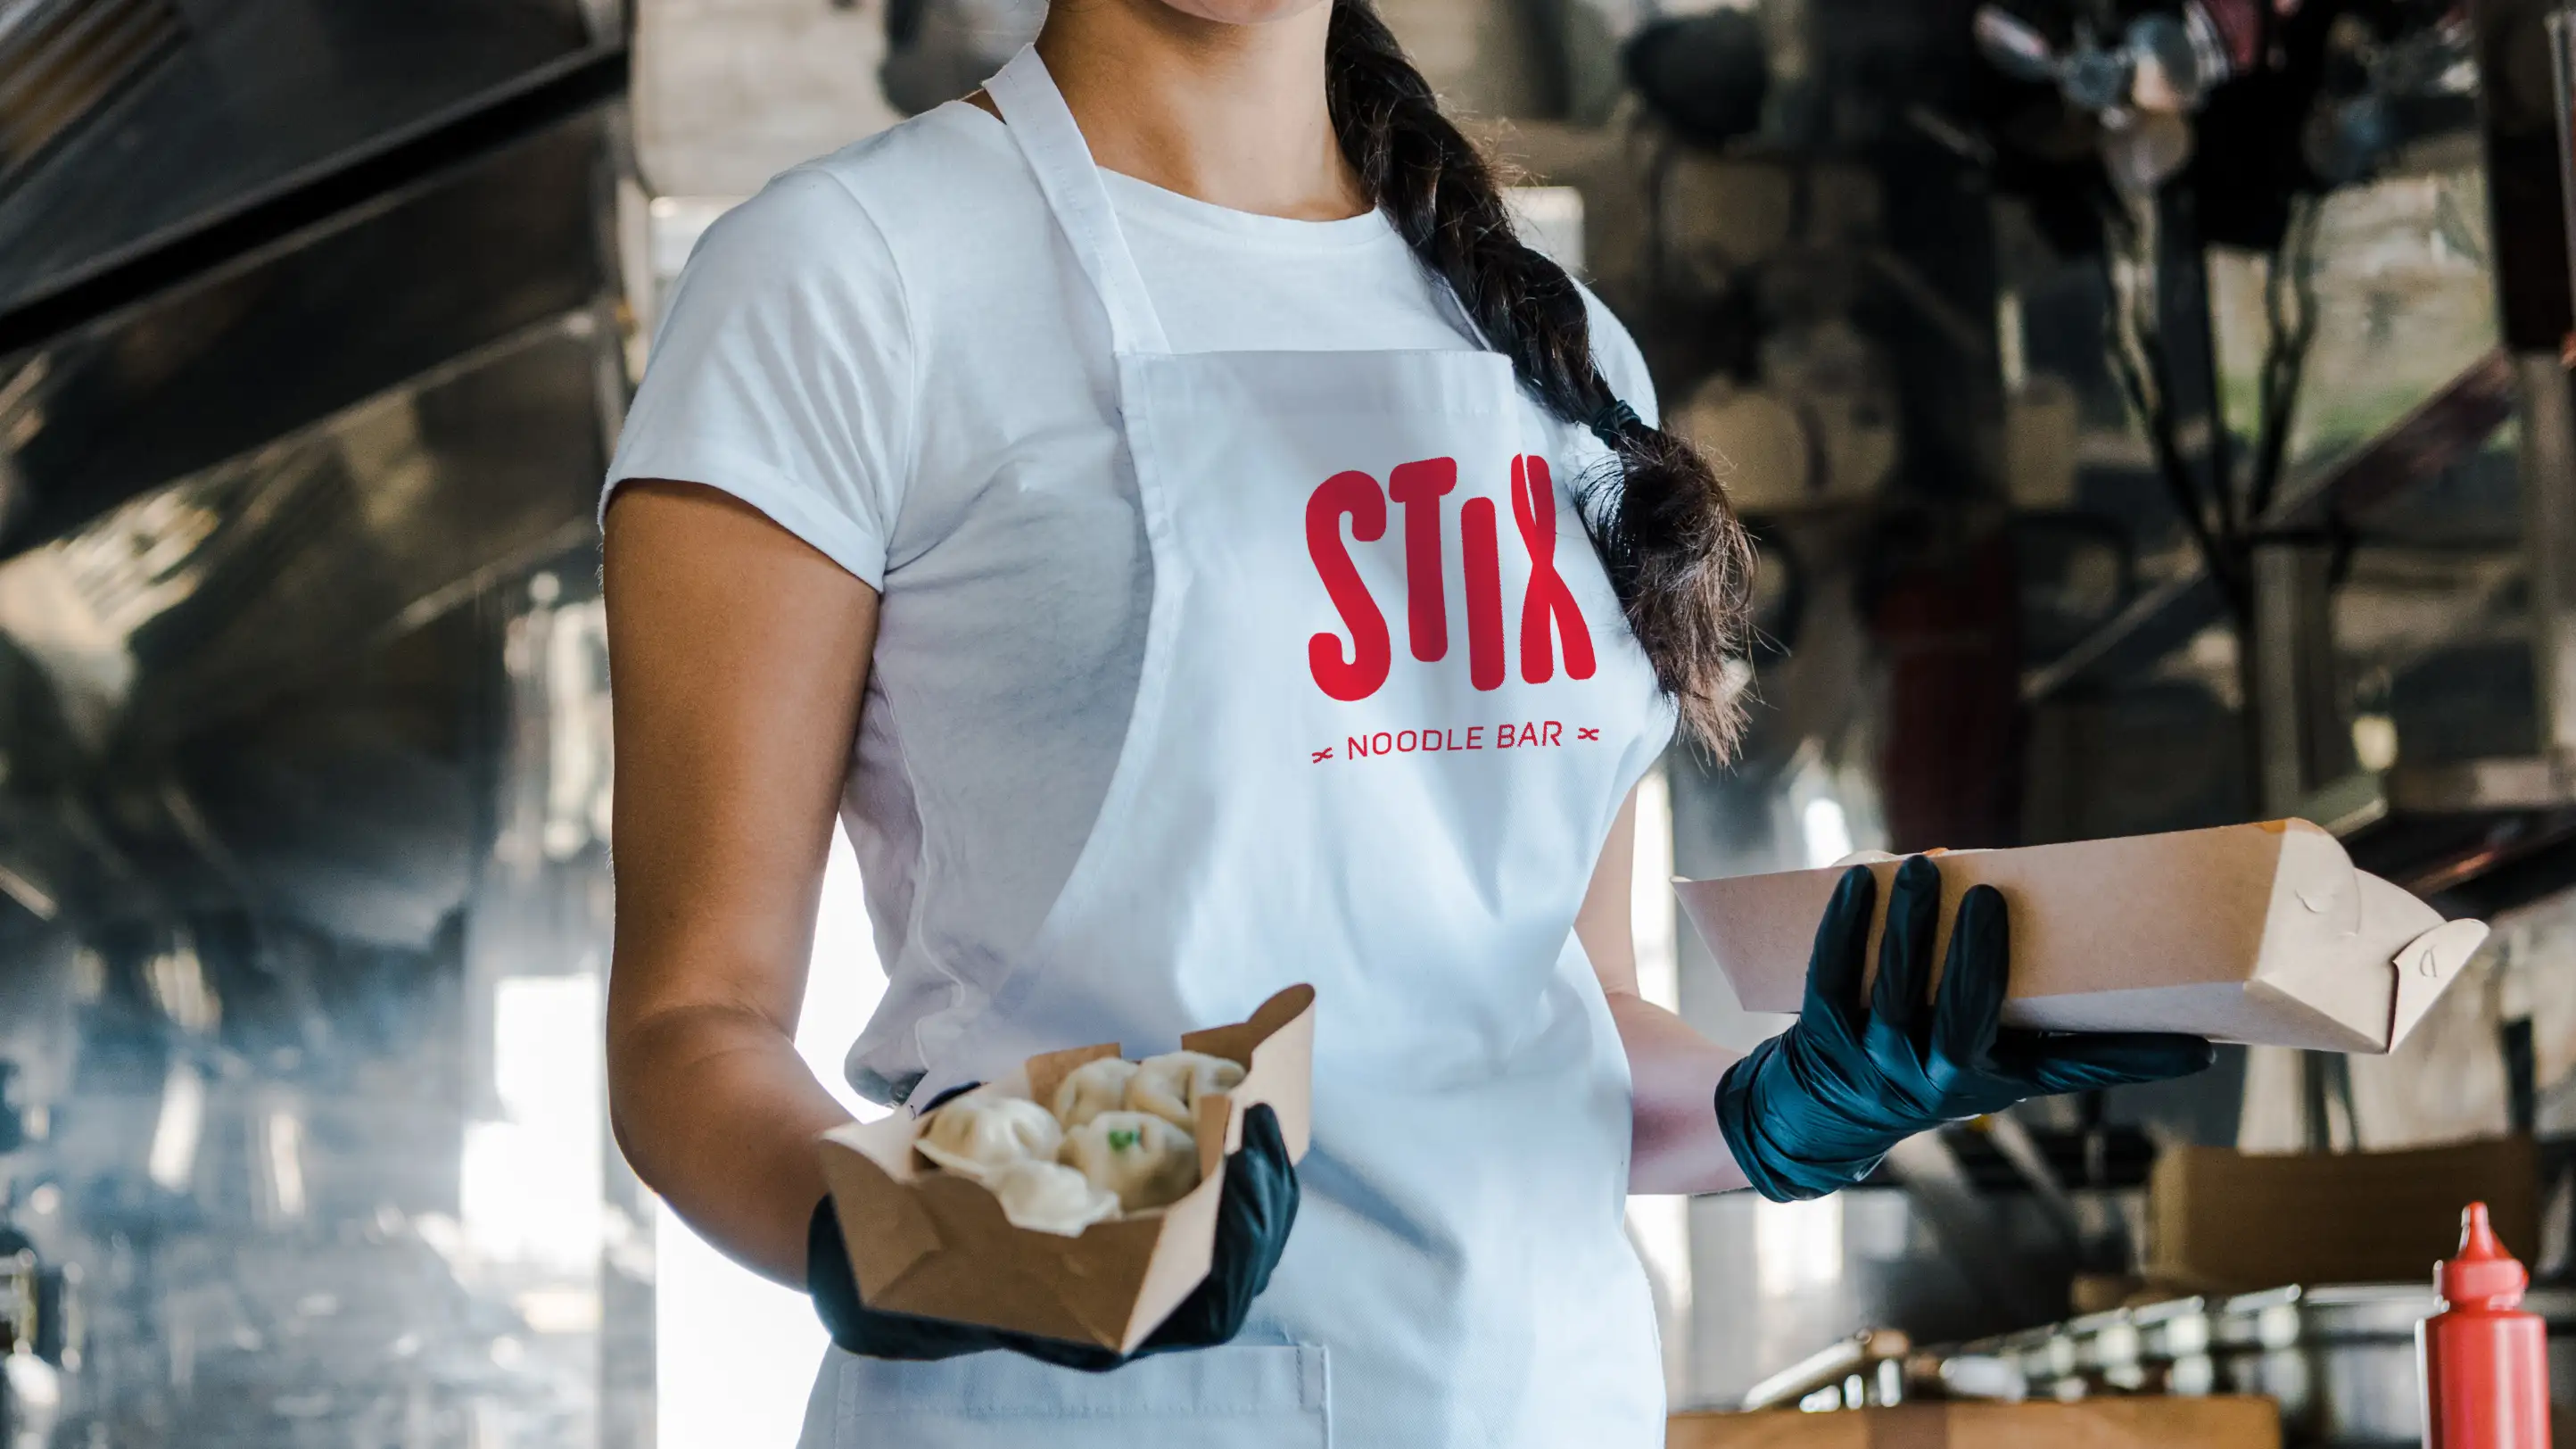 Food truck server wearing white apron featuring Stix Noodle Bar logo design in red.